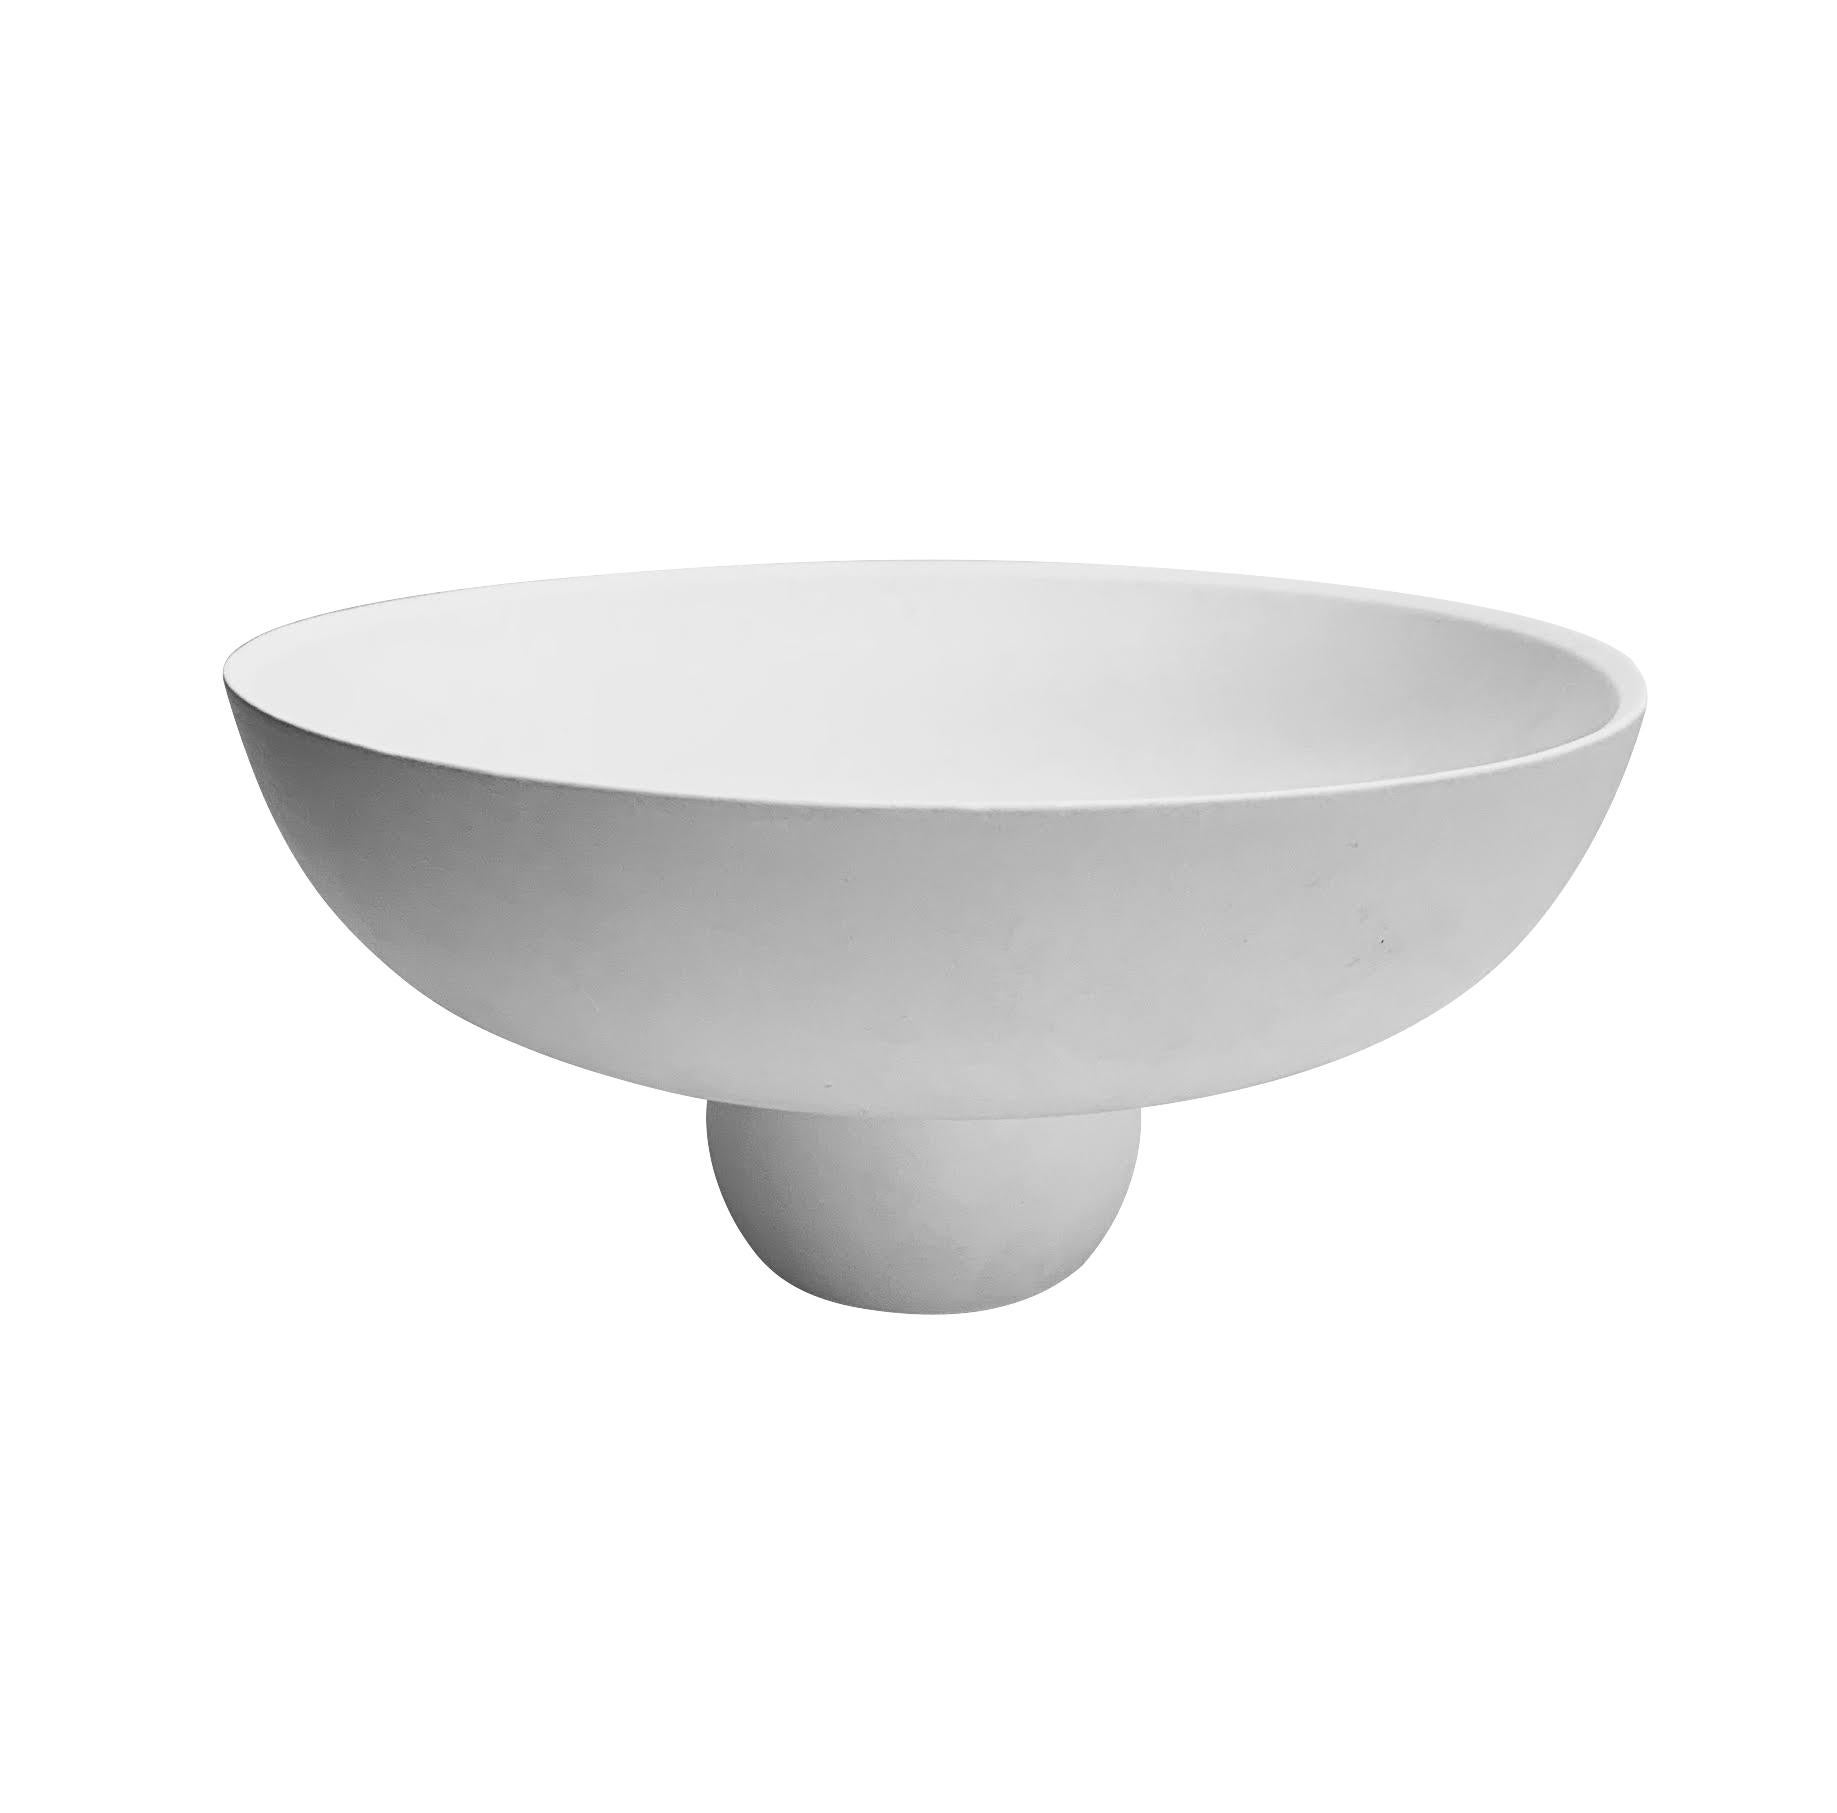 Contemporary Danish designed smooth white bowl with round sphere base.
Part of a very large collection.